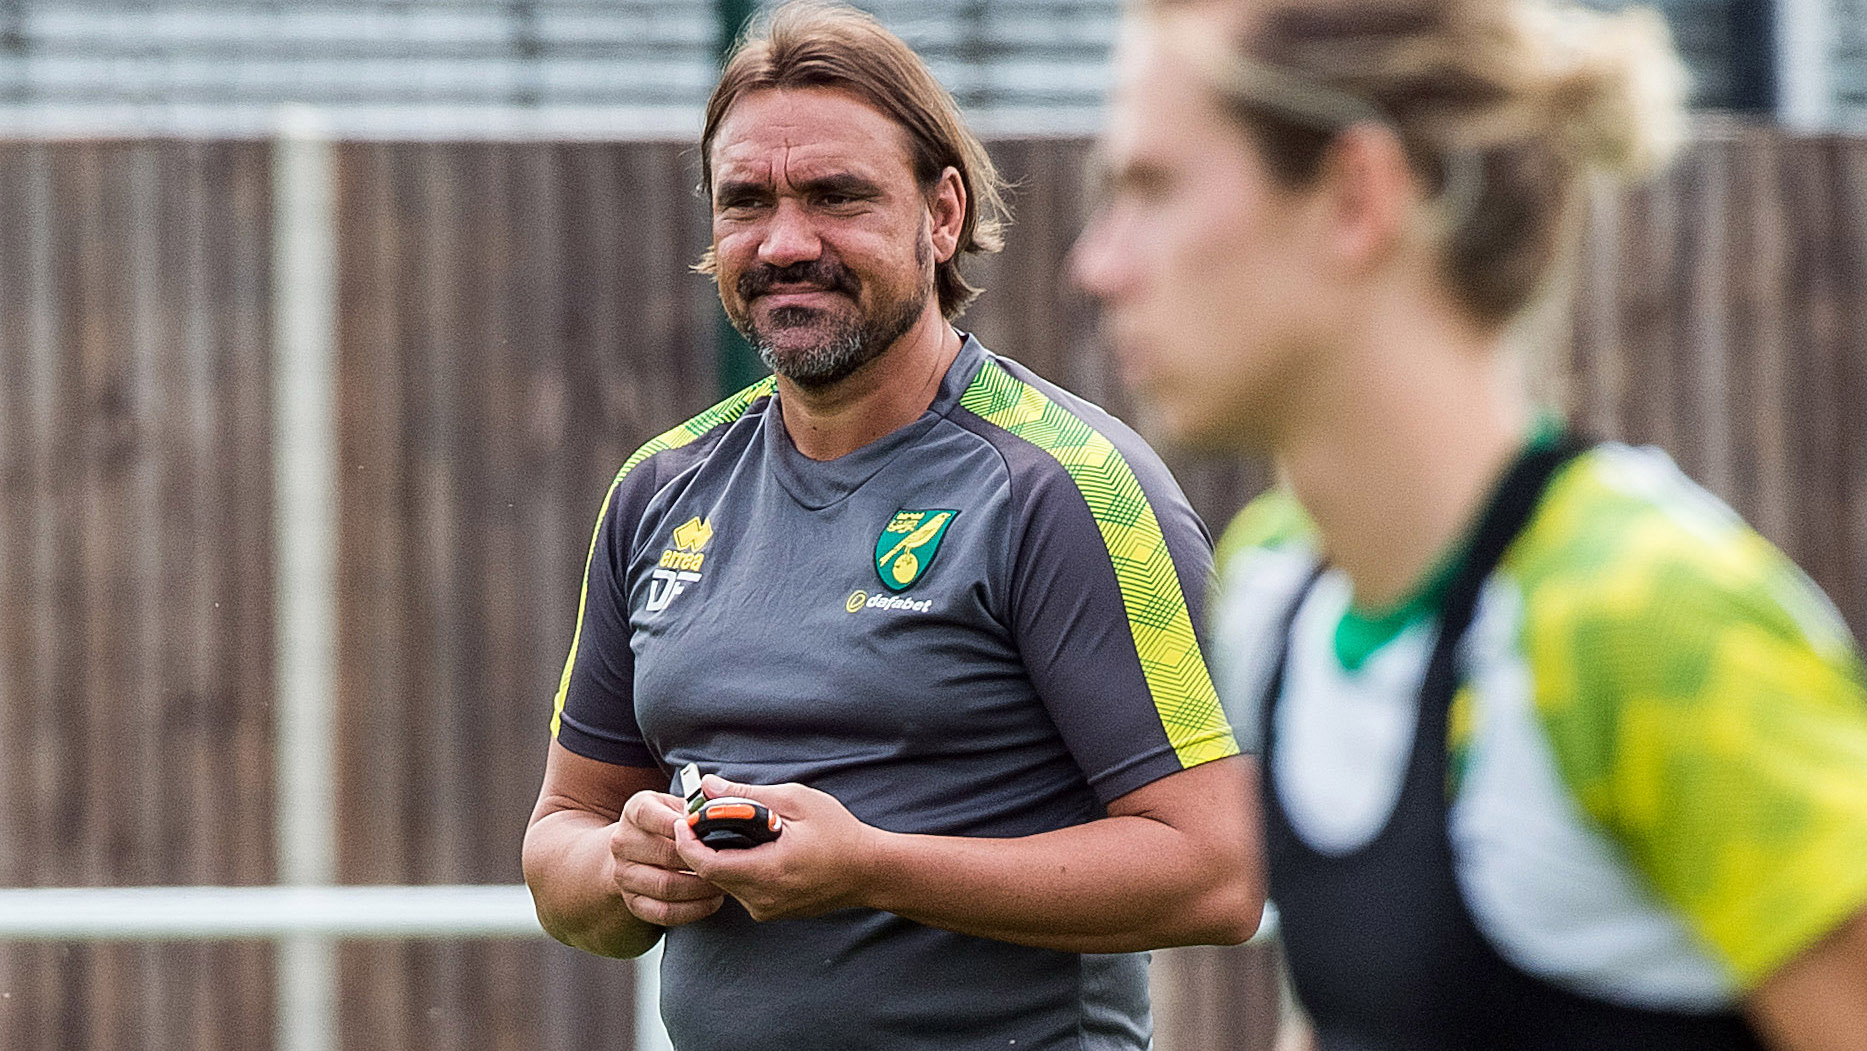 Norwich City escaping relegation is not realistic but it is possible, proclaims Daniel Farke